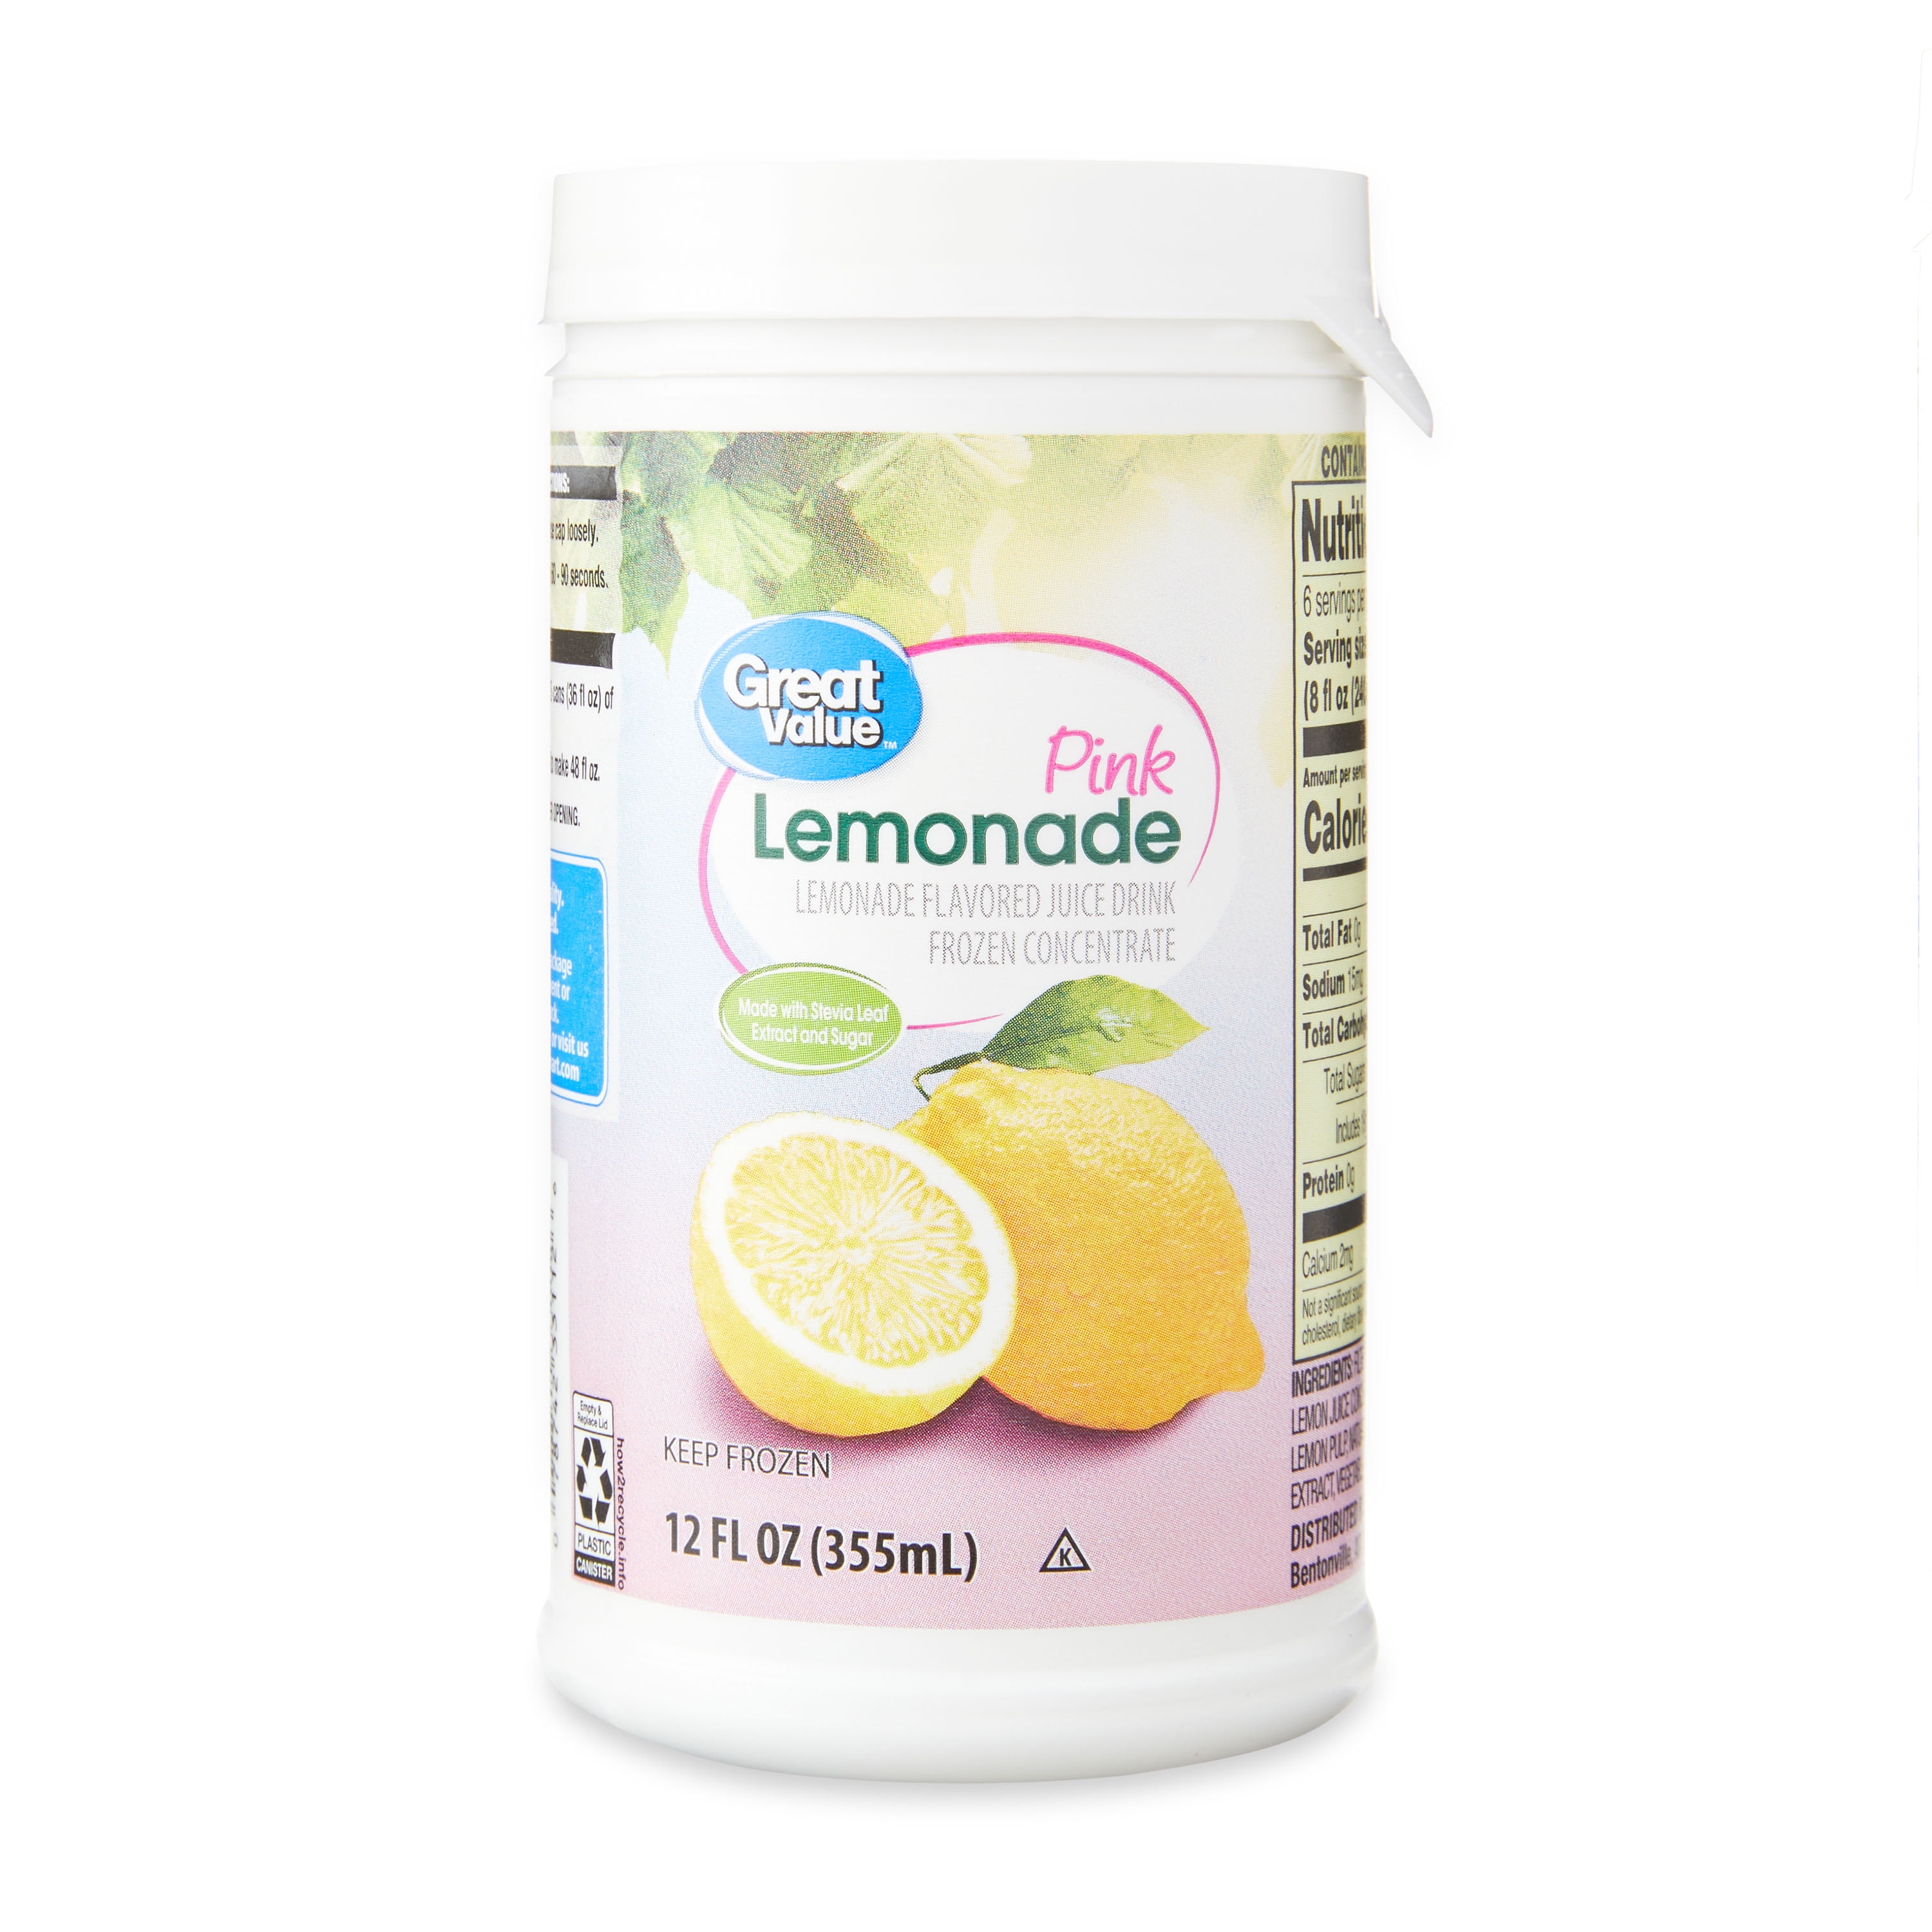 Pink Lemonade Frozen Concentrate, Can